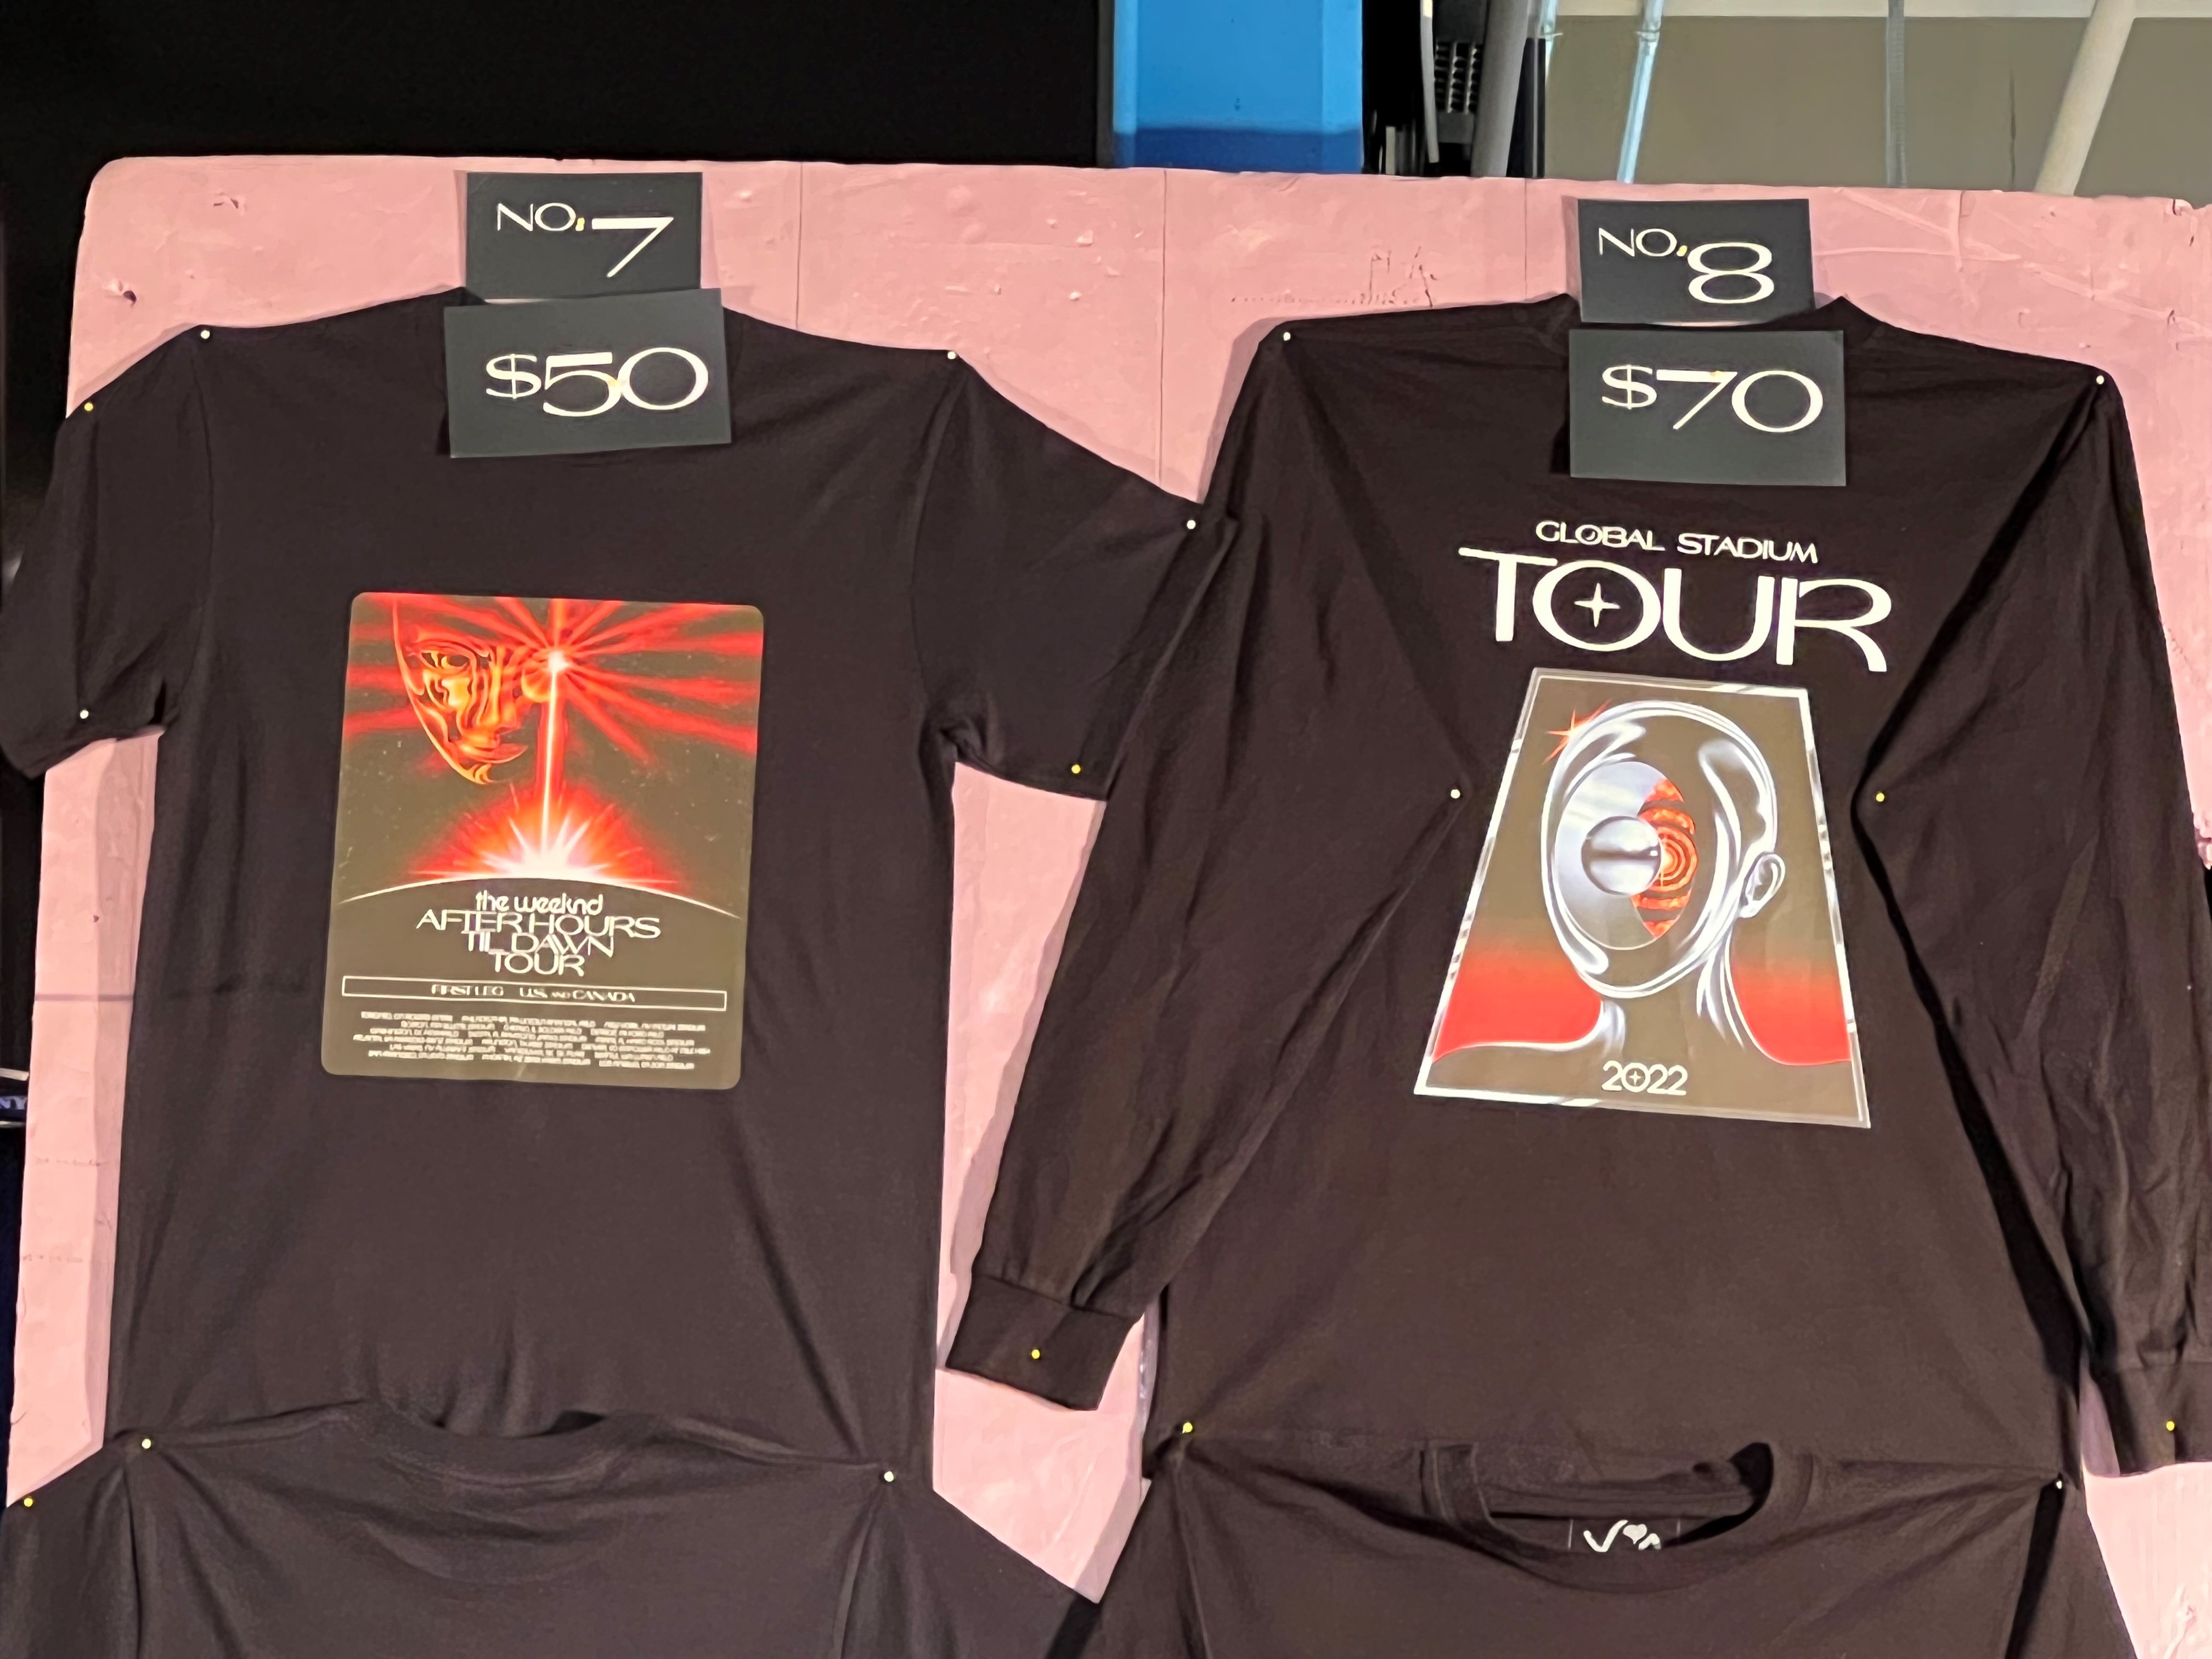 FREE shipping The Weeknd After Hours Tour Merch T-shirt, Unisex